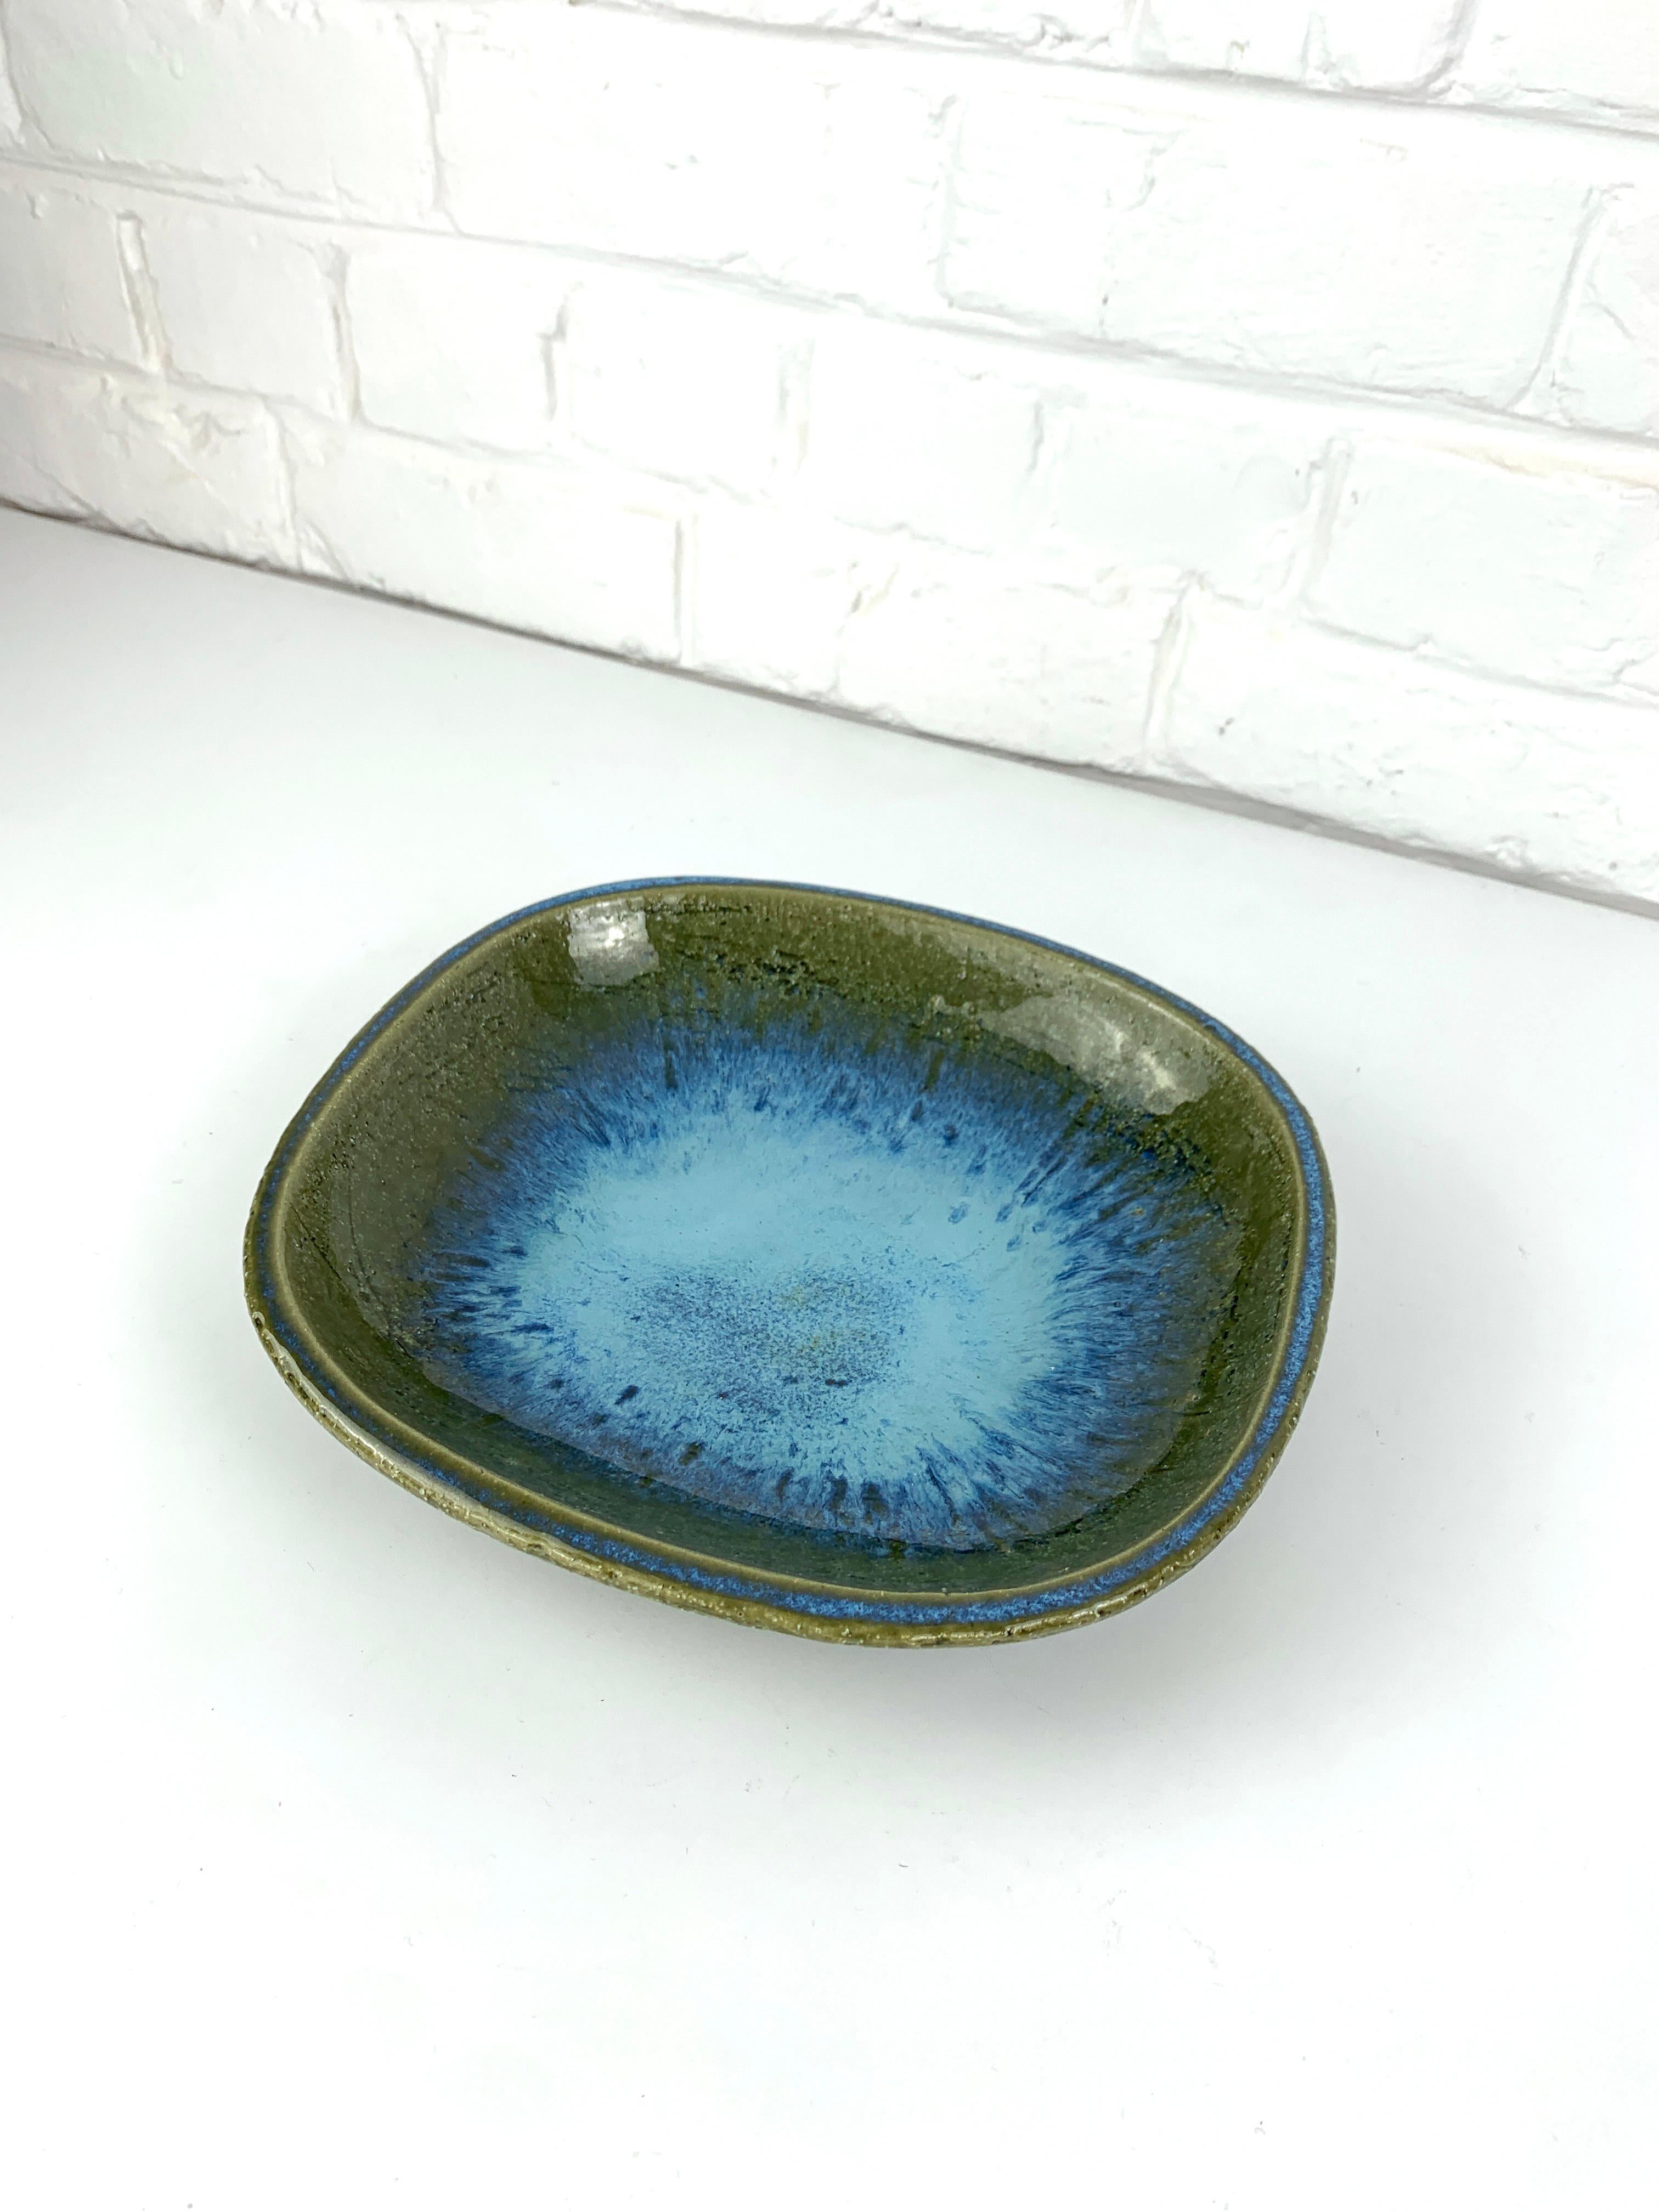 Large ceramic vide-poche or low bowl in olive green tones with an impressive blue flame in the center.  The blue effects are replicated onto the outside edge. It comes with a thick glaze.

Scandinavian Mid-Century 1960s, produced by Palshus